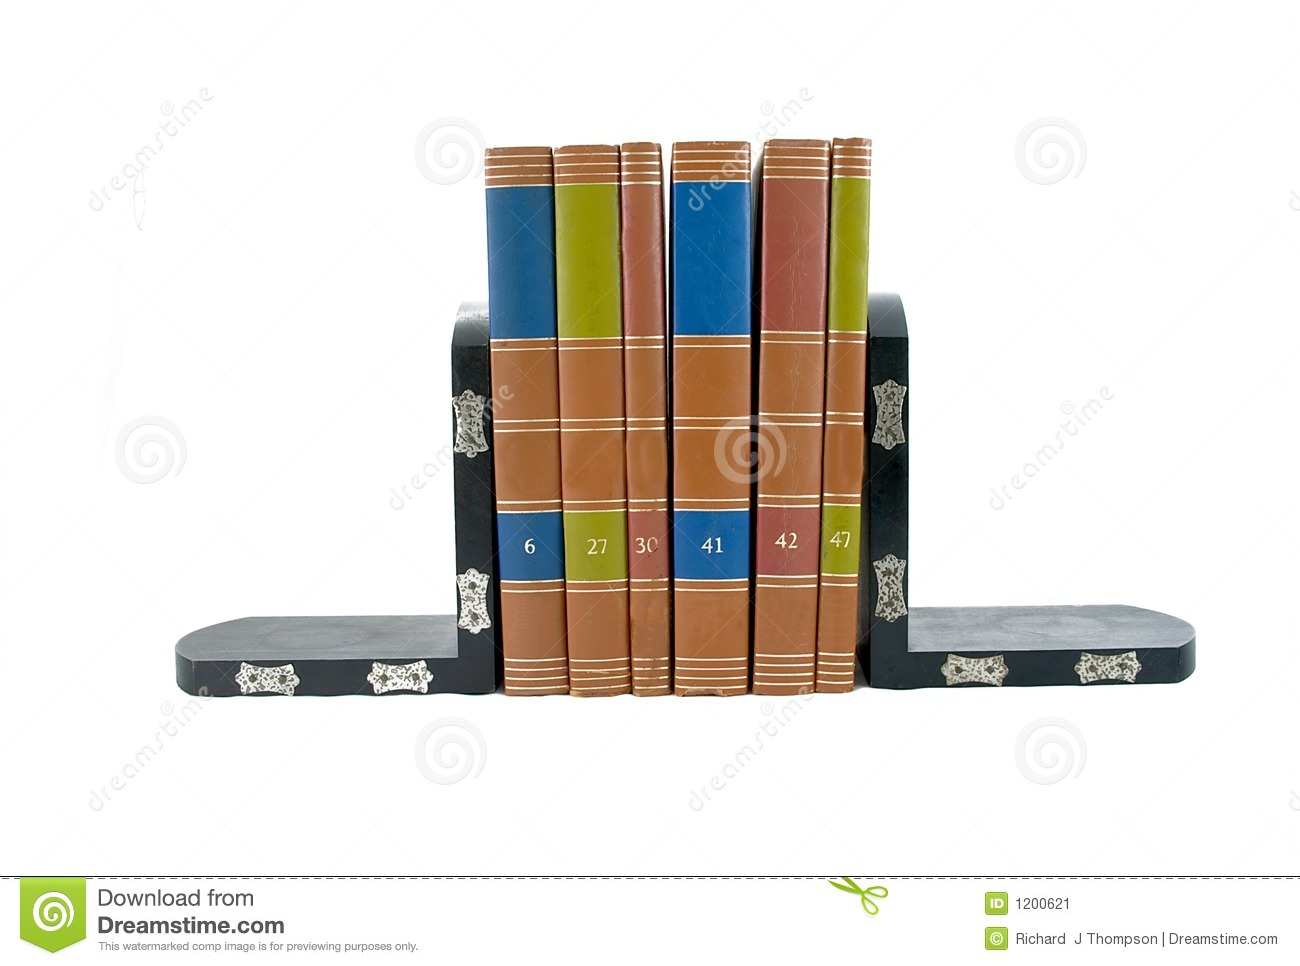 Bookends  3 Stock Image   Image  1200621